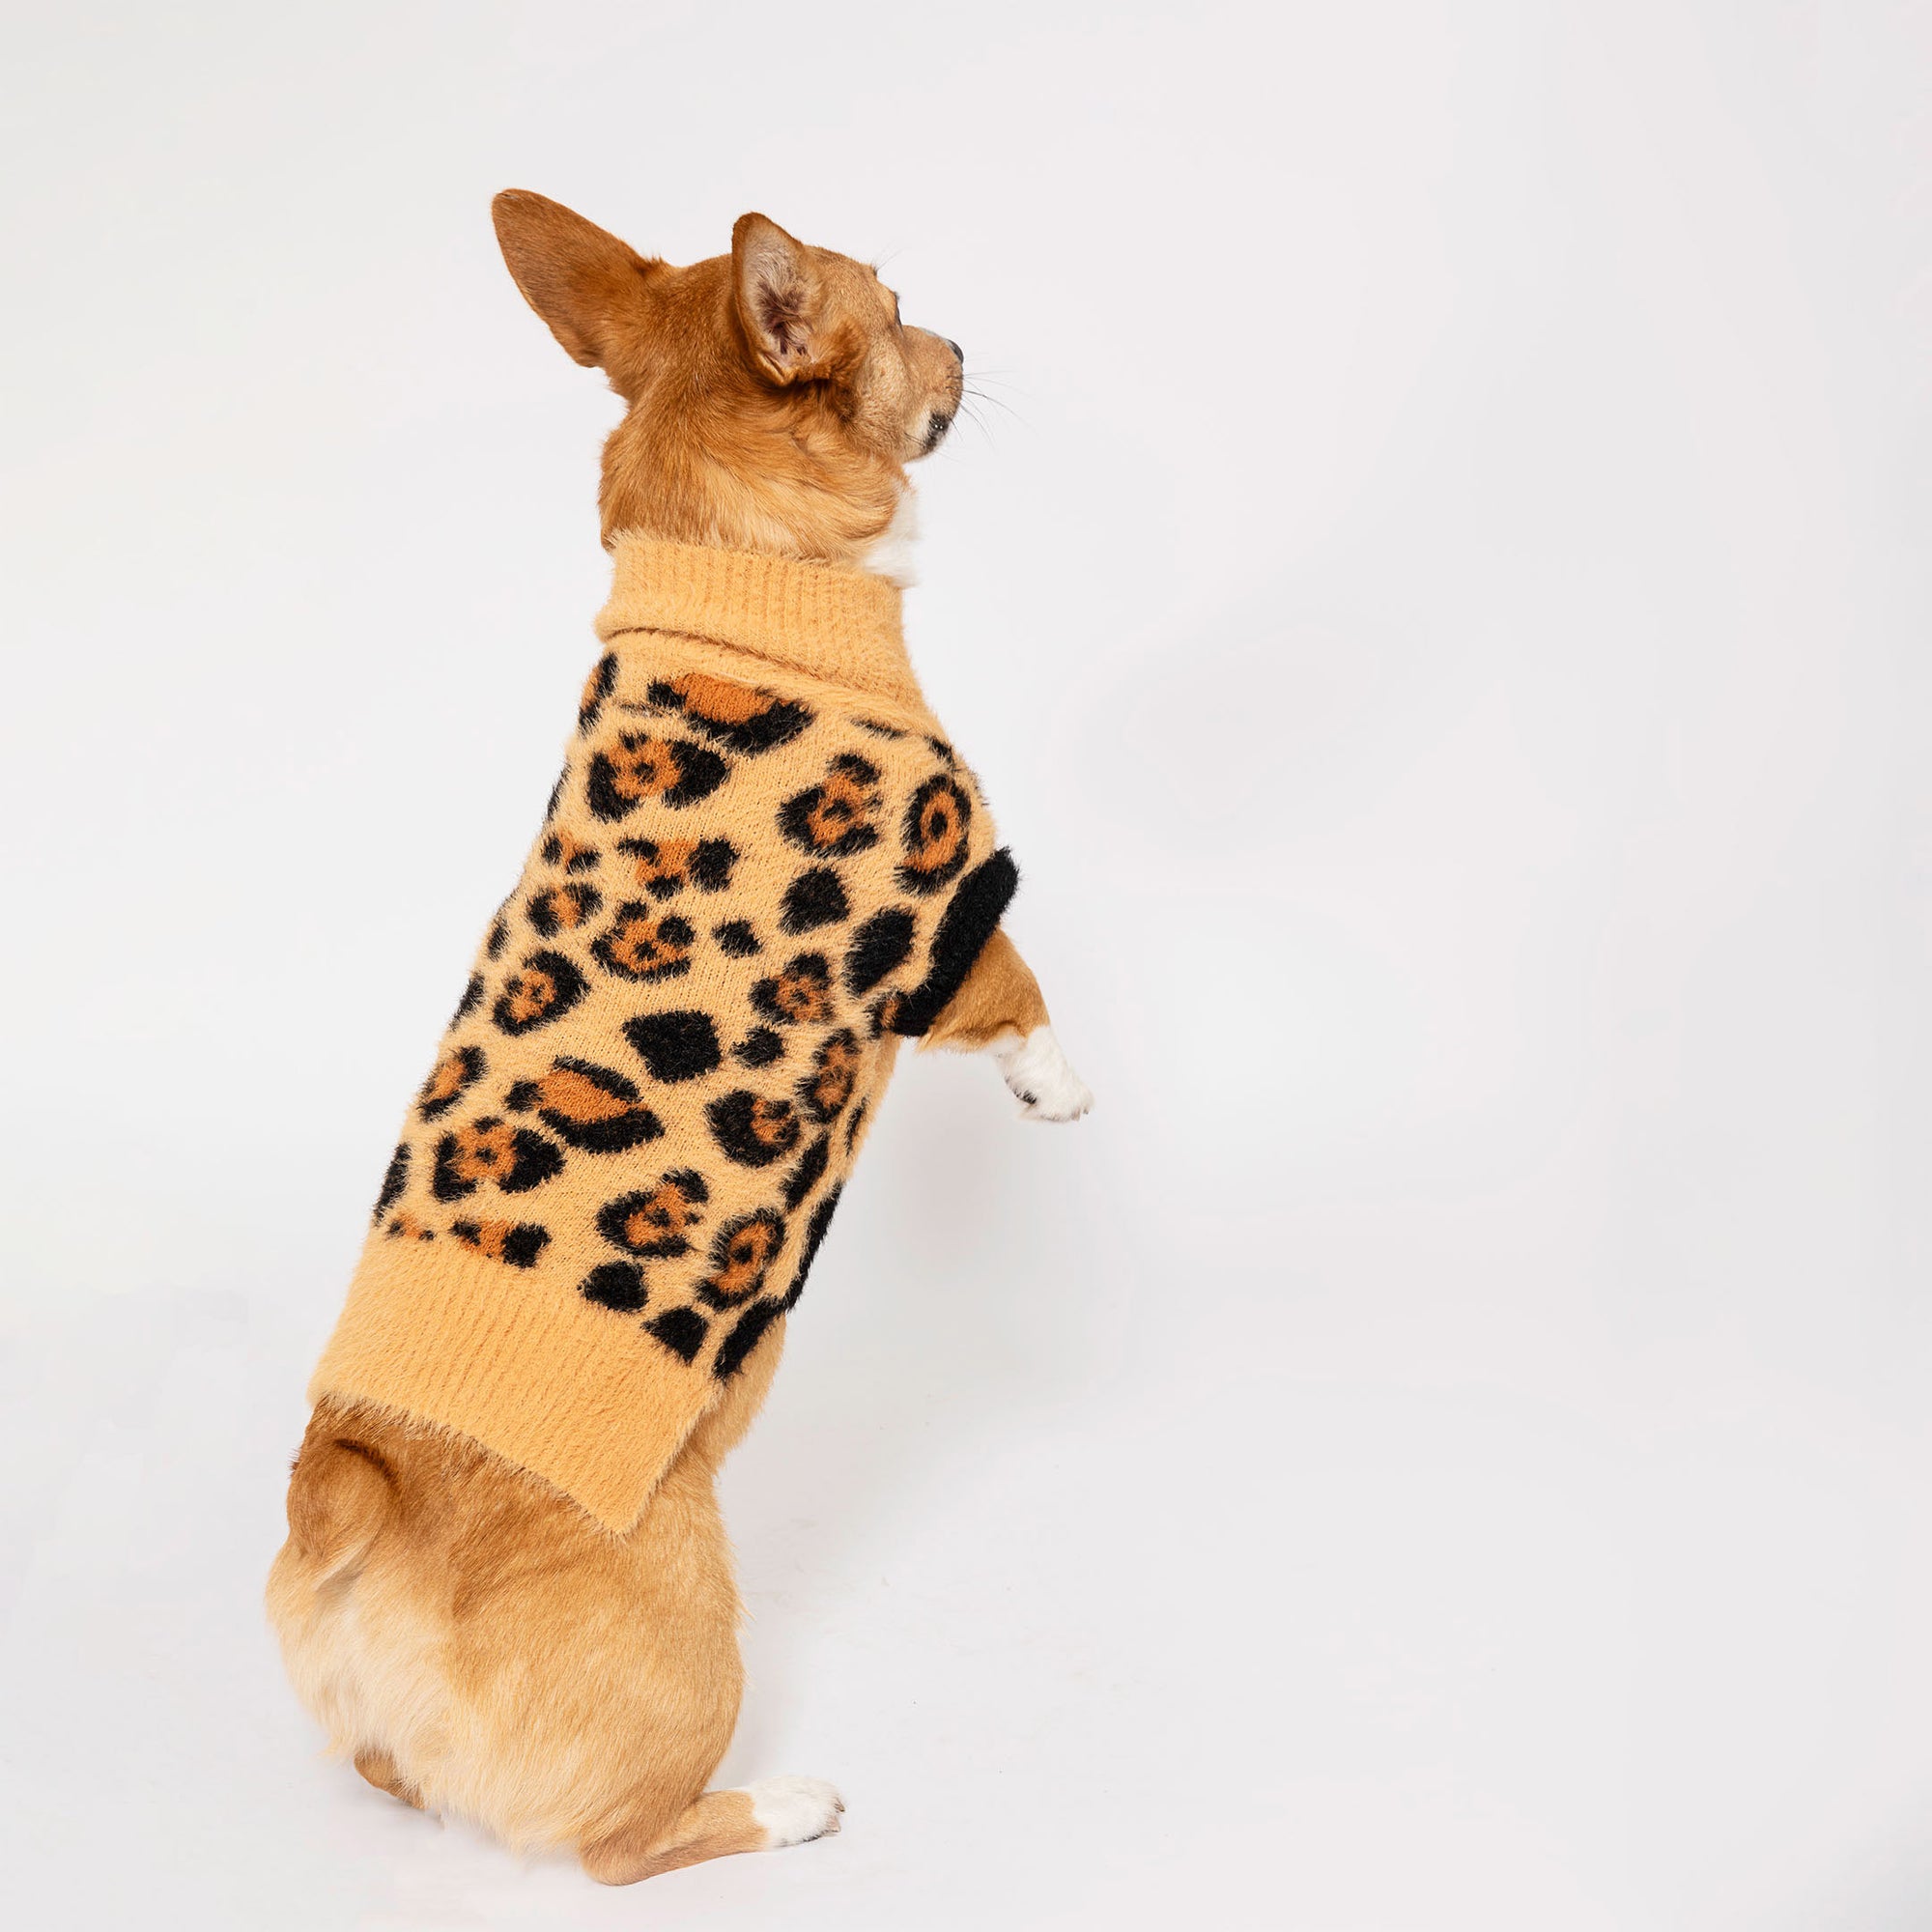 Playful Corgi standing on hind legs in a tan and black leopard print sweater, looking off into the distance, against a white studio backdrop.